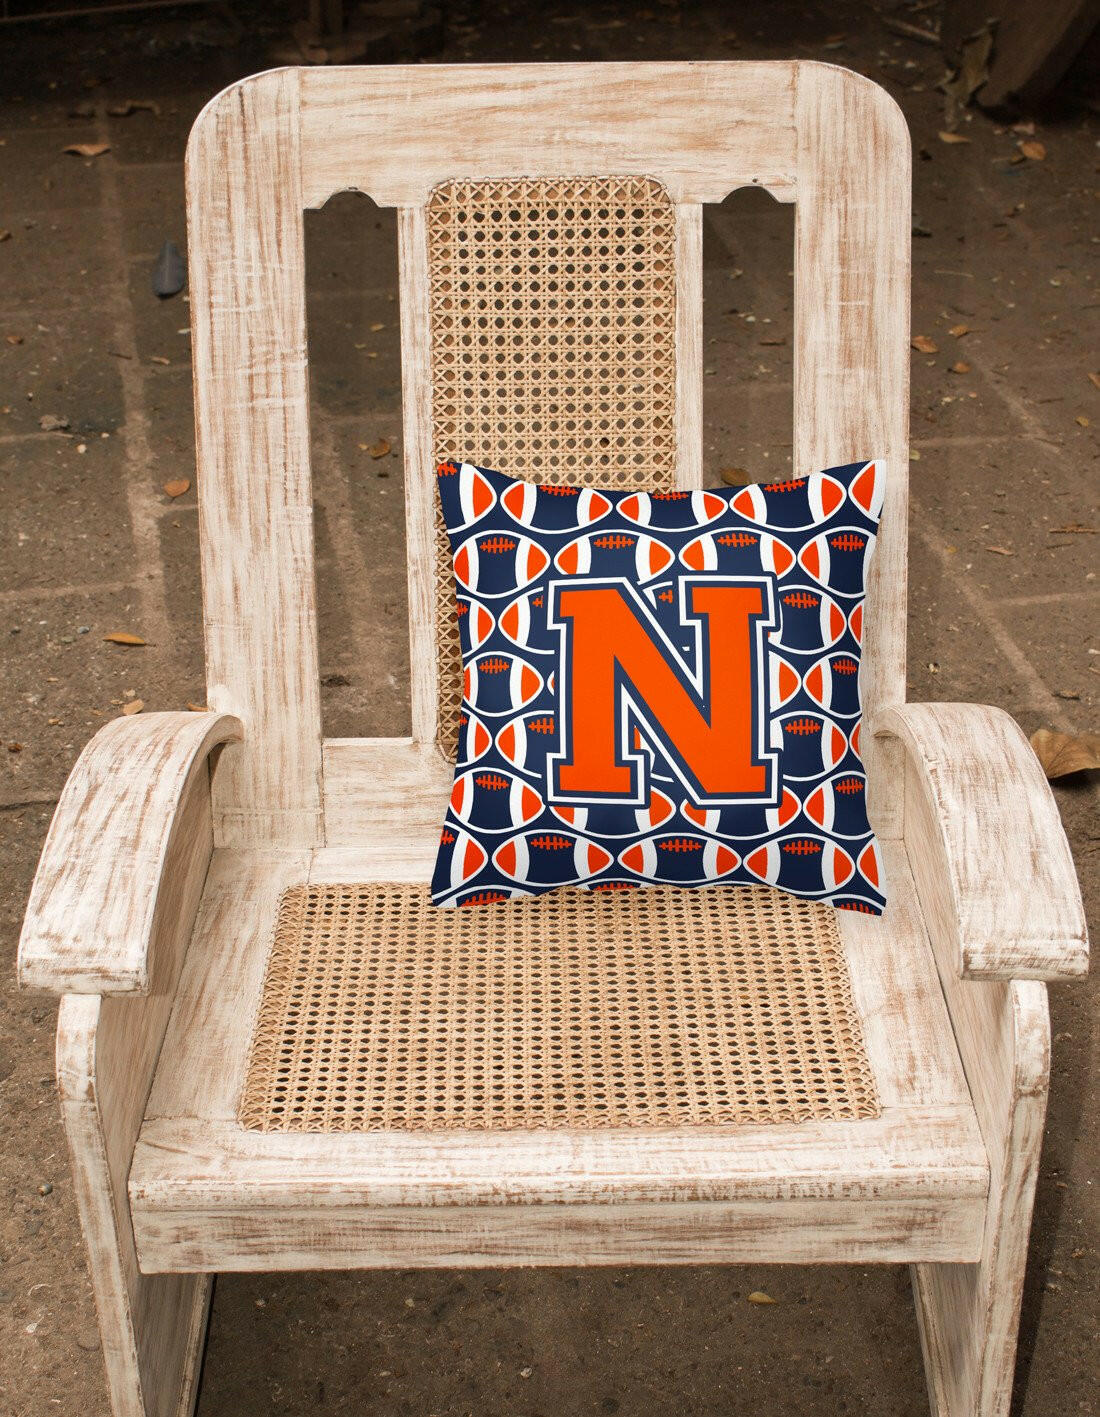 Letter N Football Orange, Blue and white Fabric Decorative Pillow CJ1066-NPW1414 by Caroline's Treasures